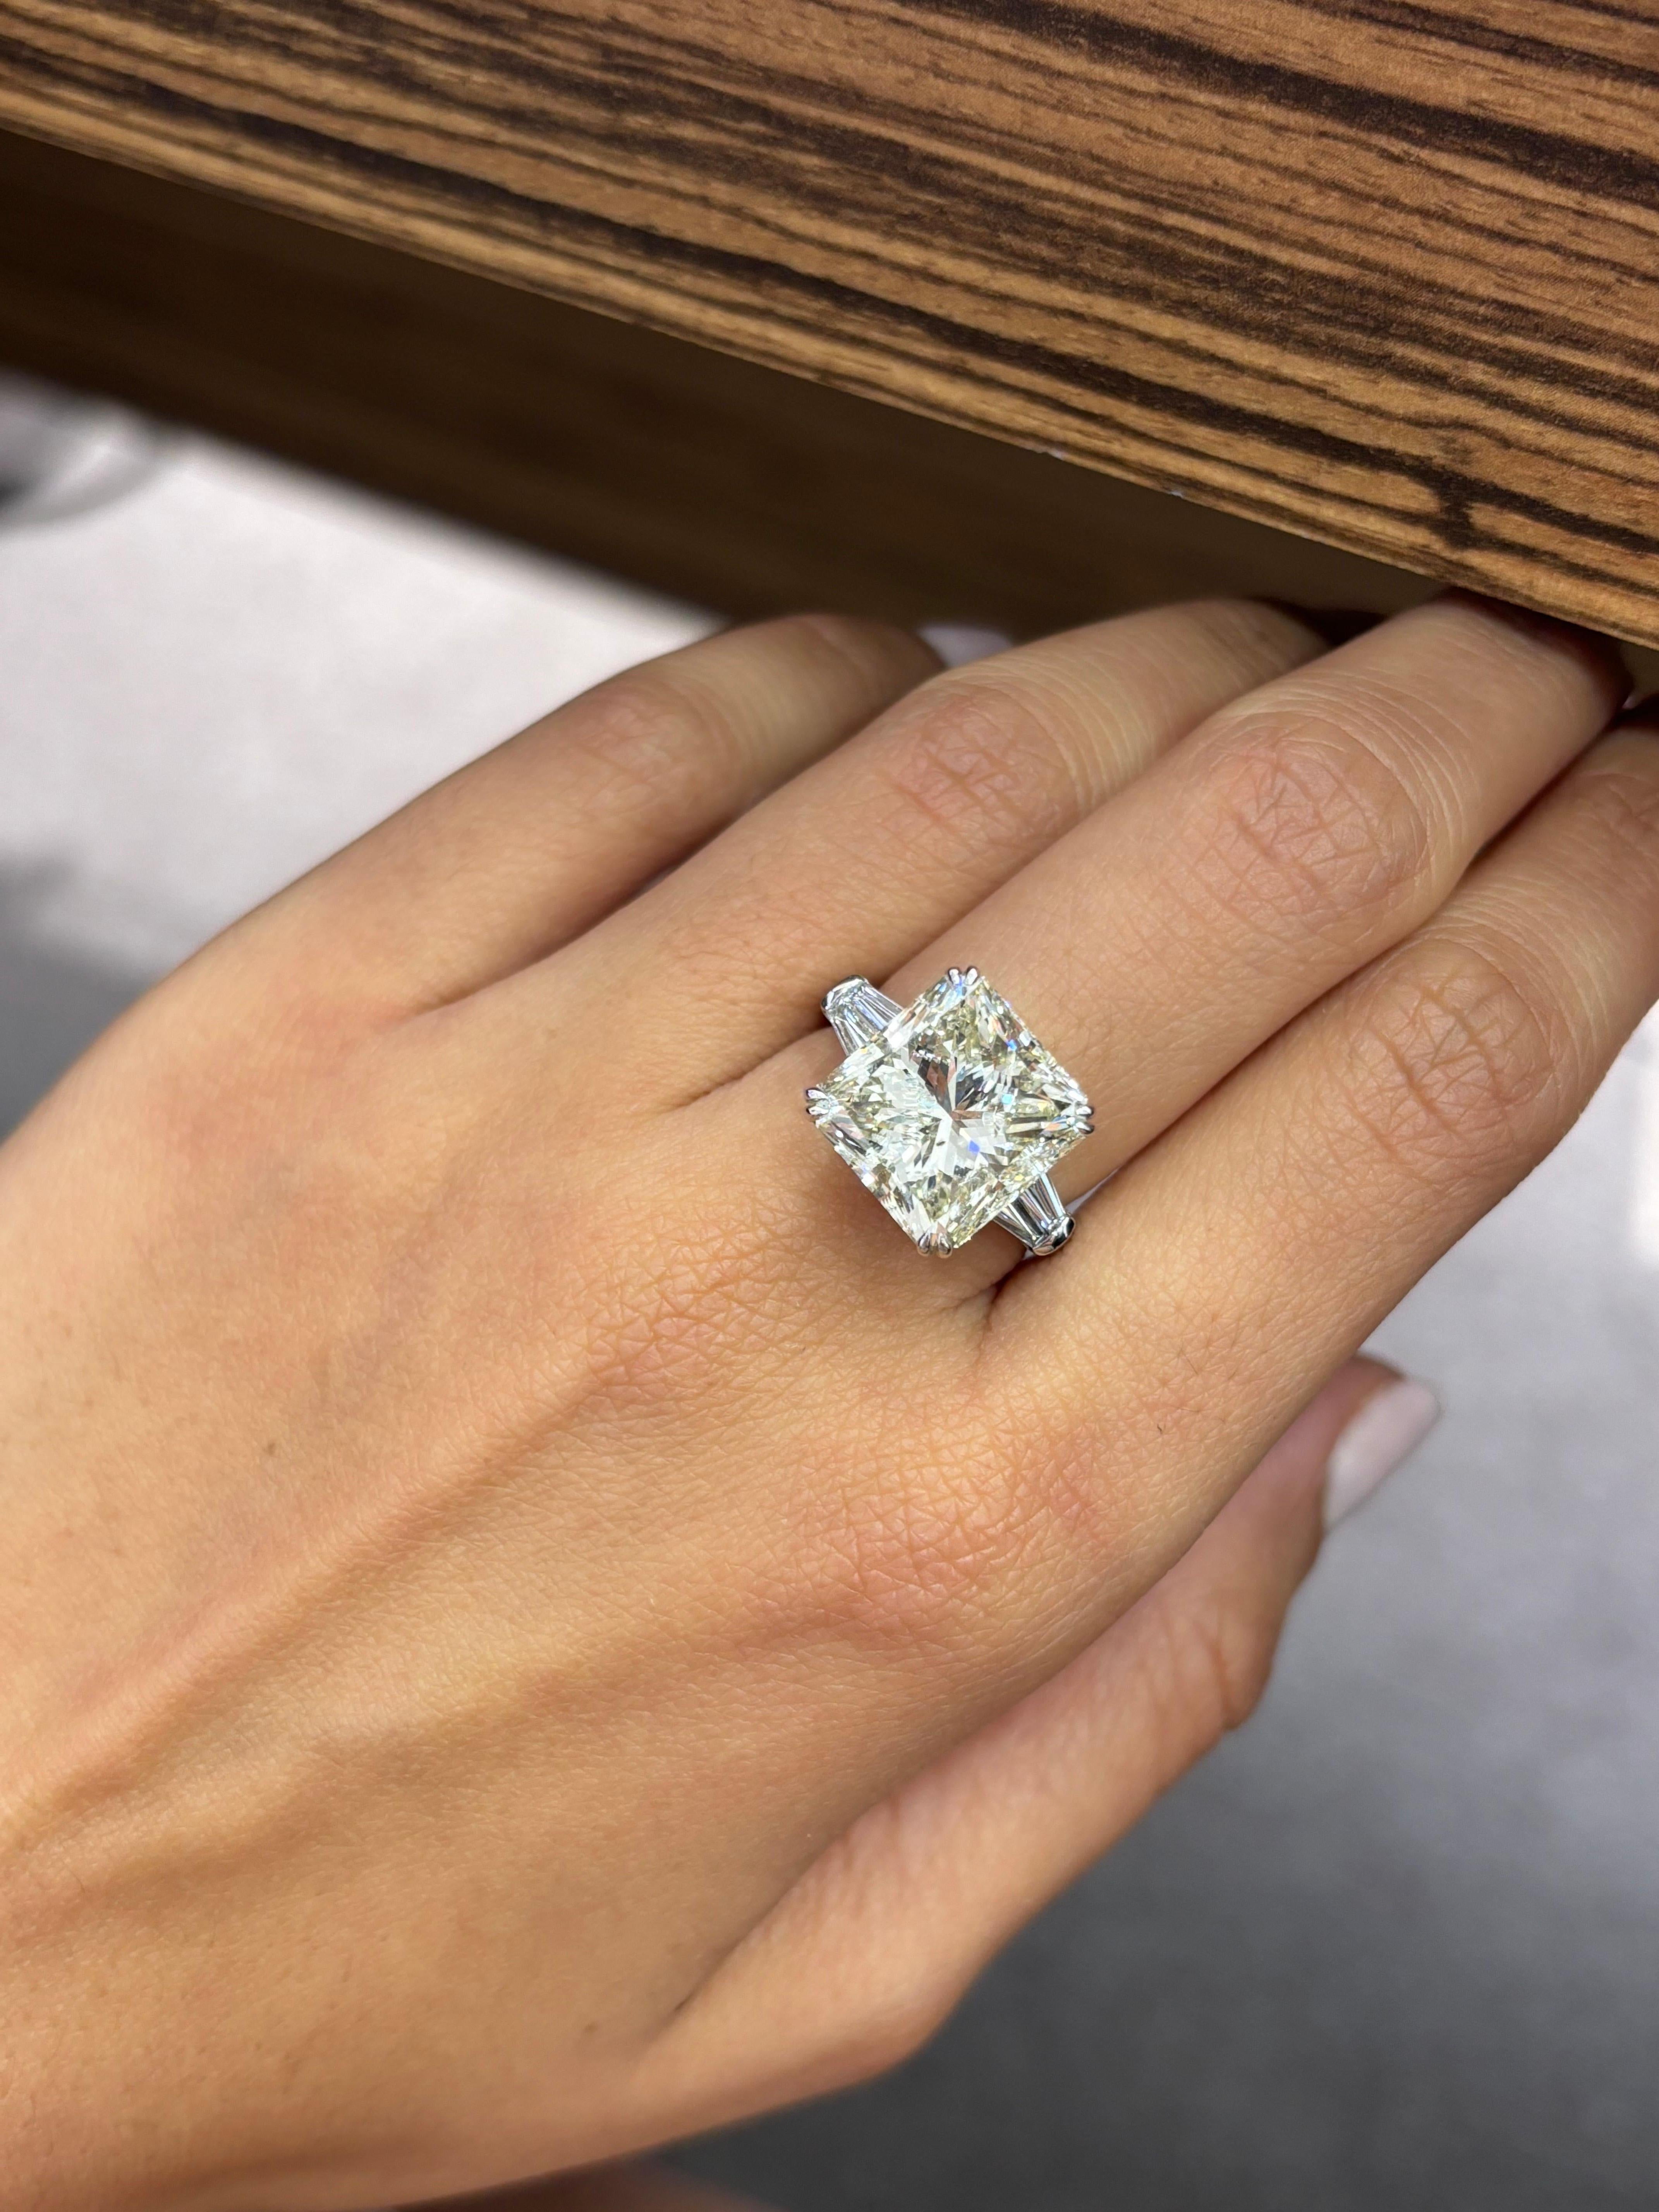 Make a statement with this beautifully crafted 10.16 carat radiant cut Diamond, set in solid 18K White Gold. The center stone natural Diamond is certified, L color, SI2 clarity. But the stone is a of a great SI qaulity, with no obvious inclusions to